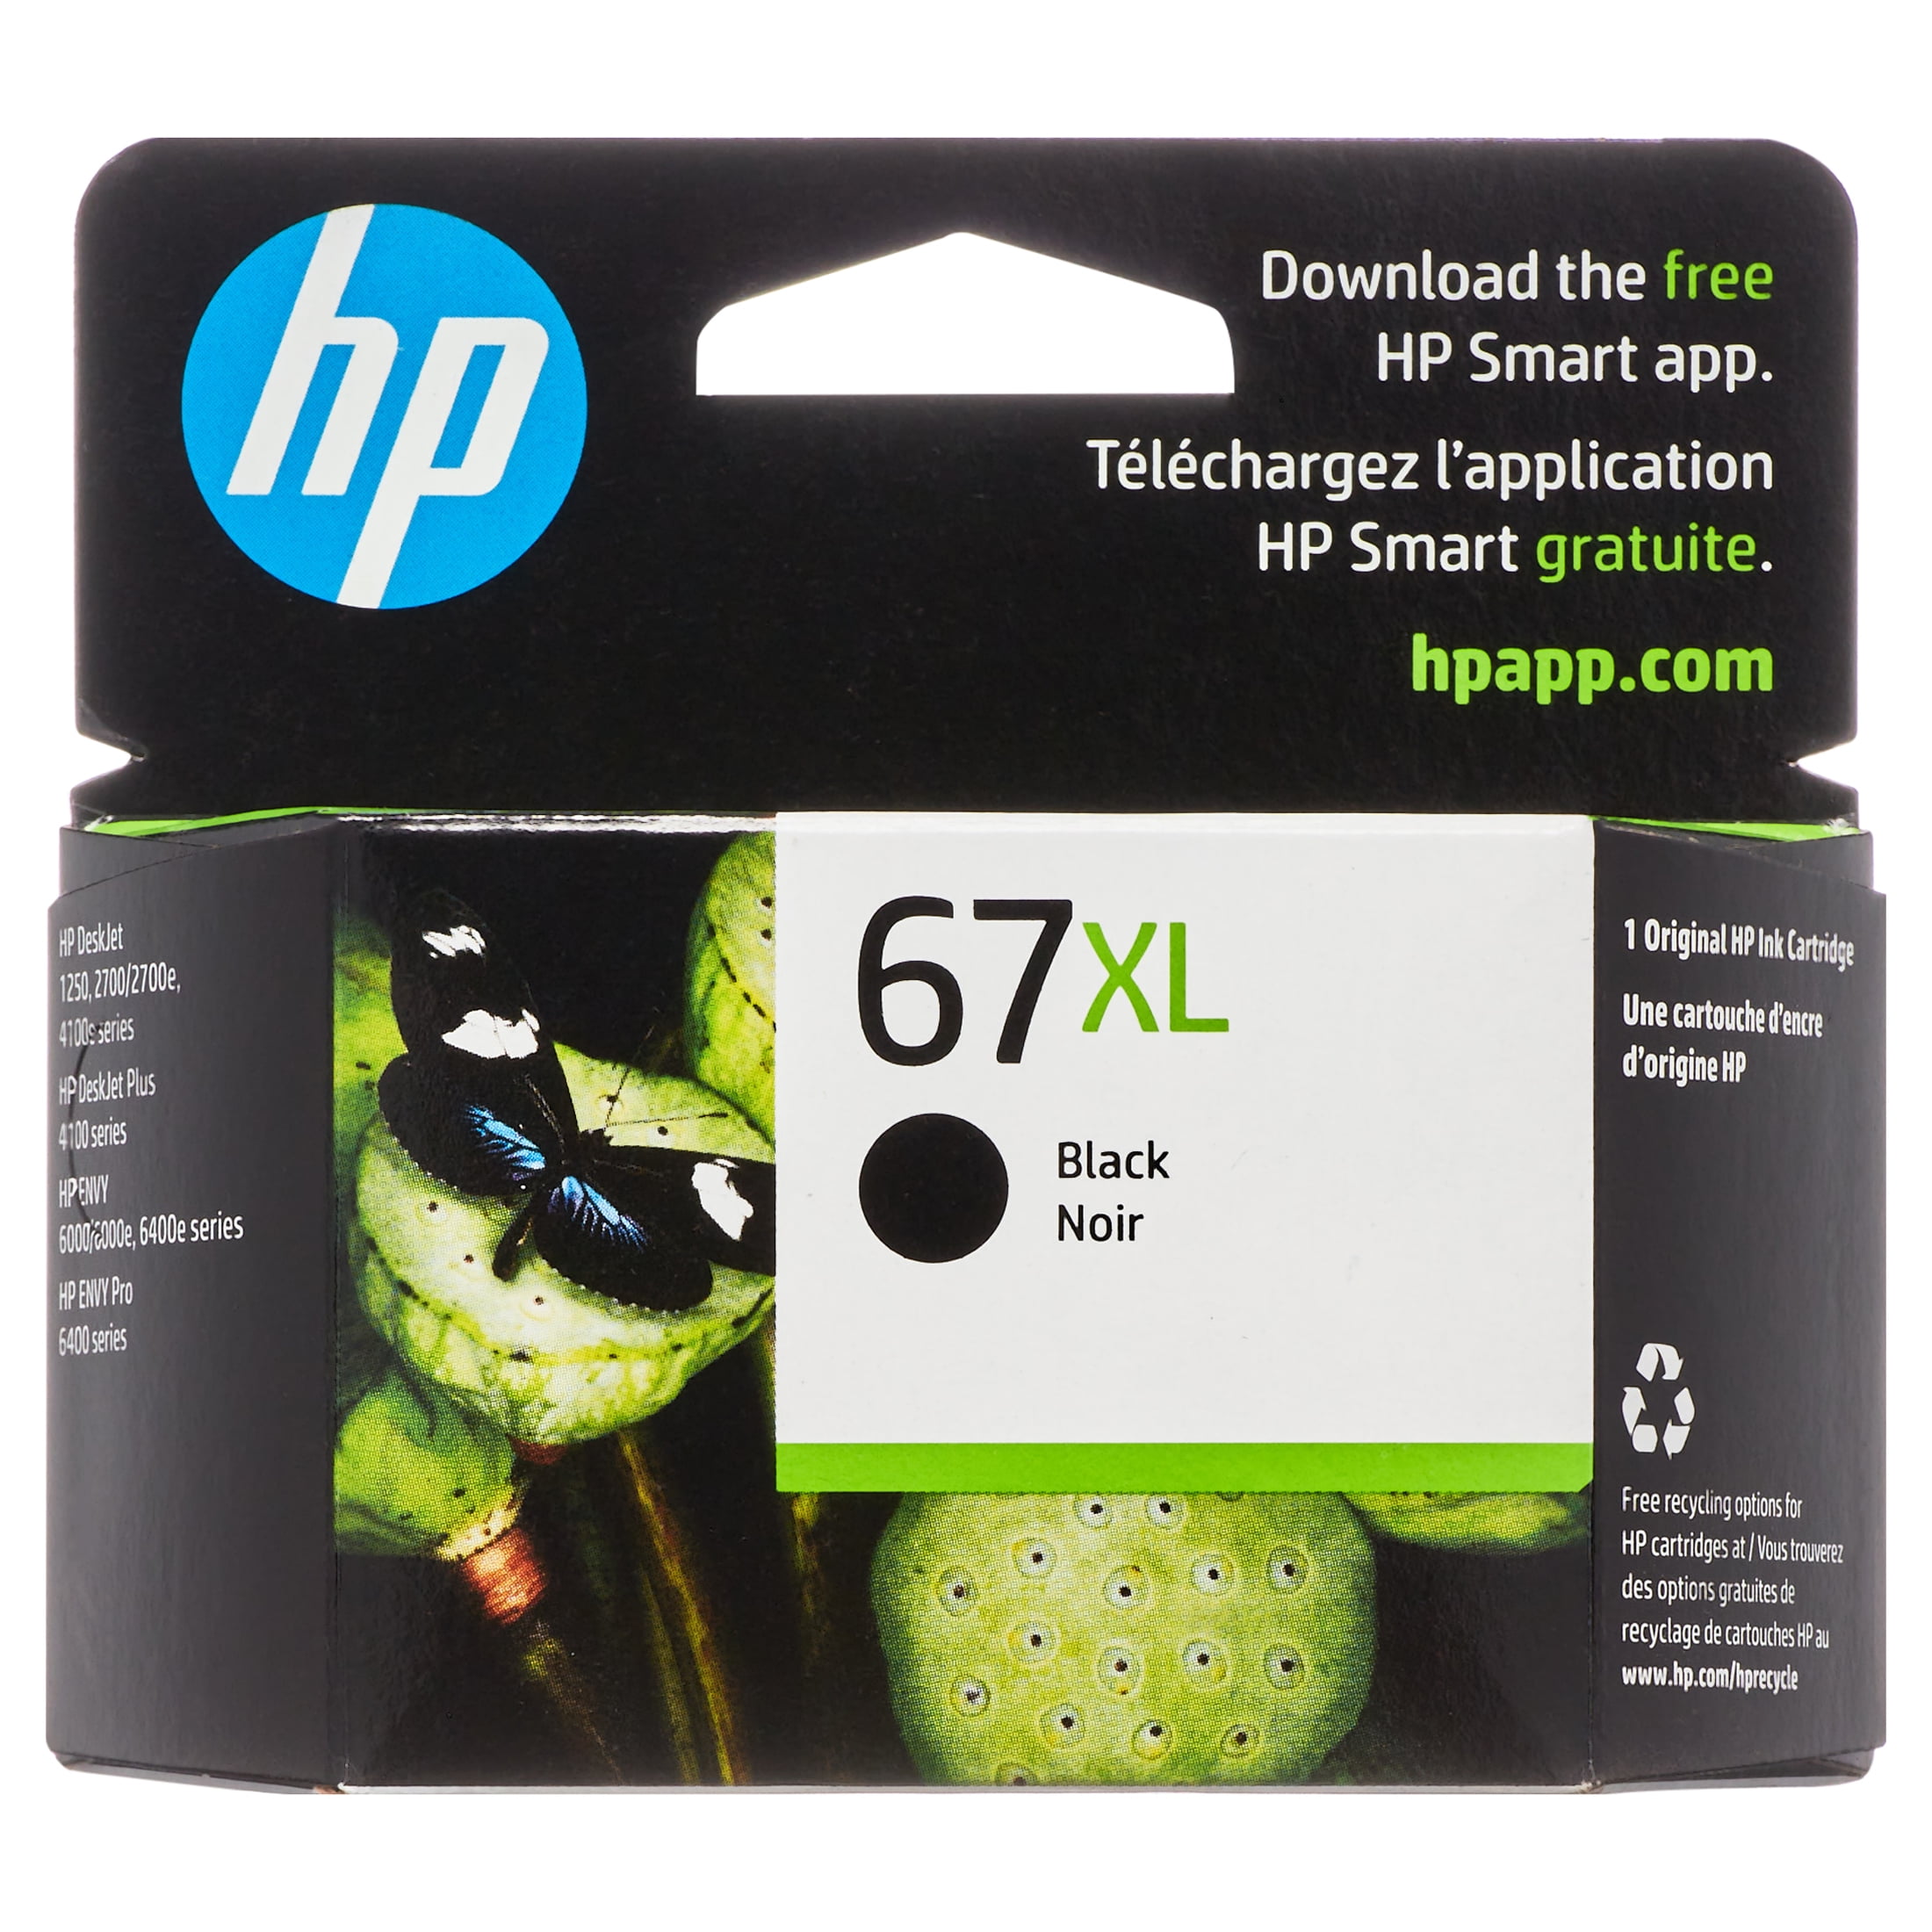 Compatible HP 304XL 2 Ink Cartridge Multipack - EXTRA HIGH CAPACITY  (Cartridge People)